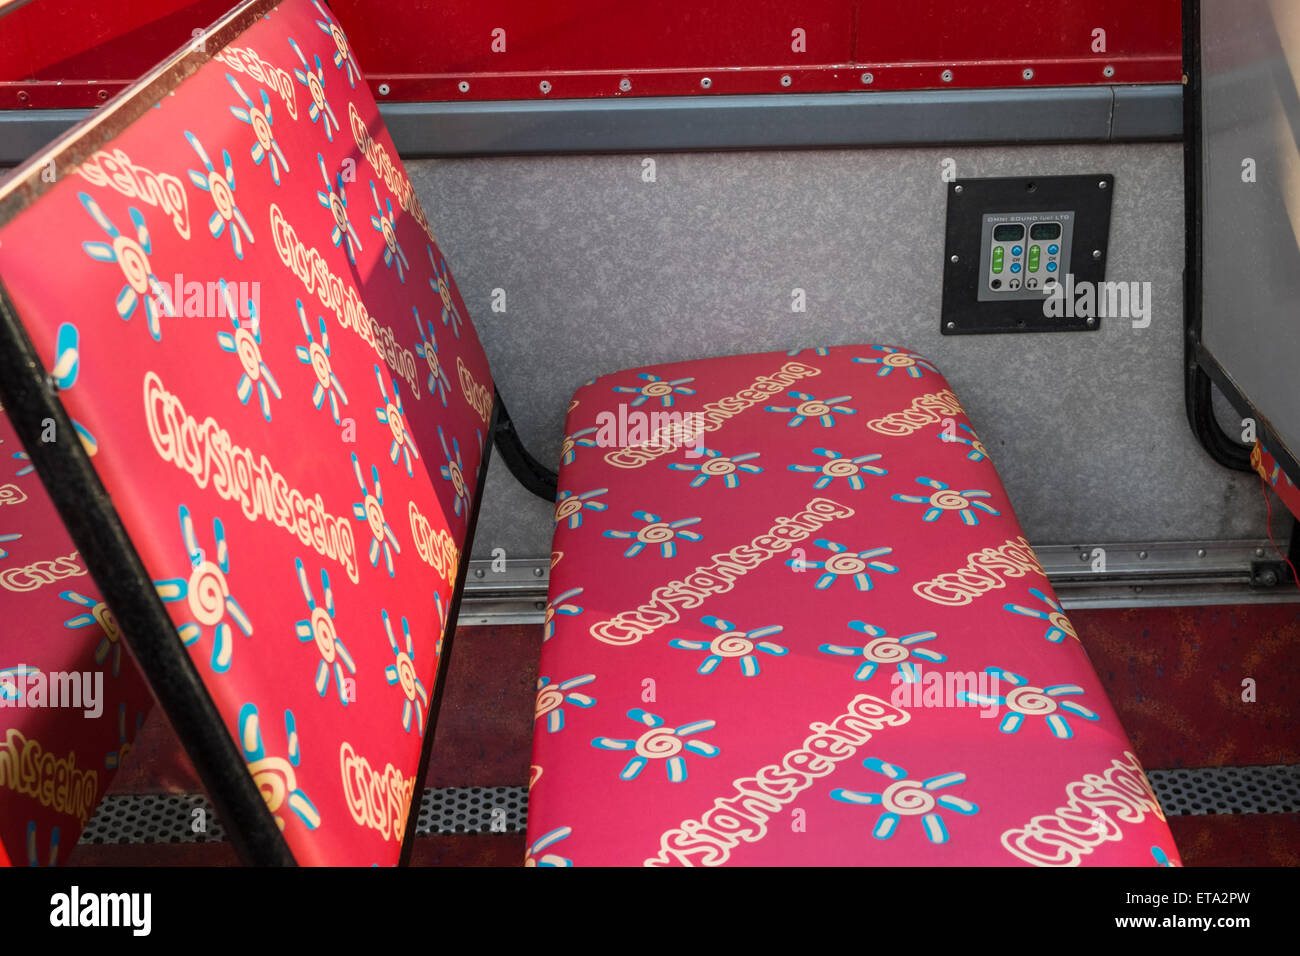 City sightseeing tour bus seat, and audio headphone socket for listening to tour commentary. Stock Photo